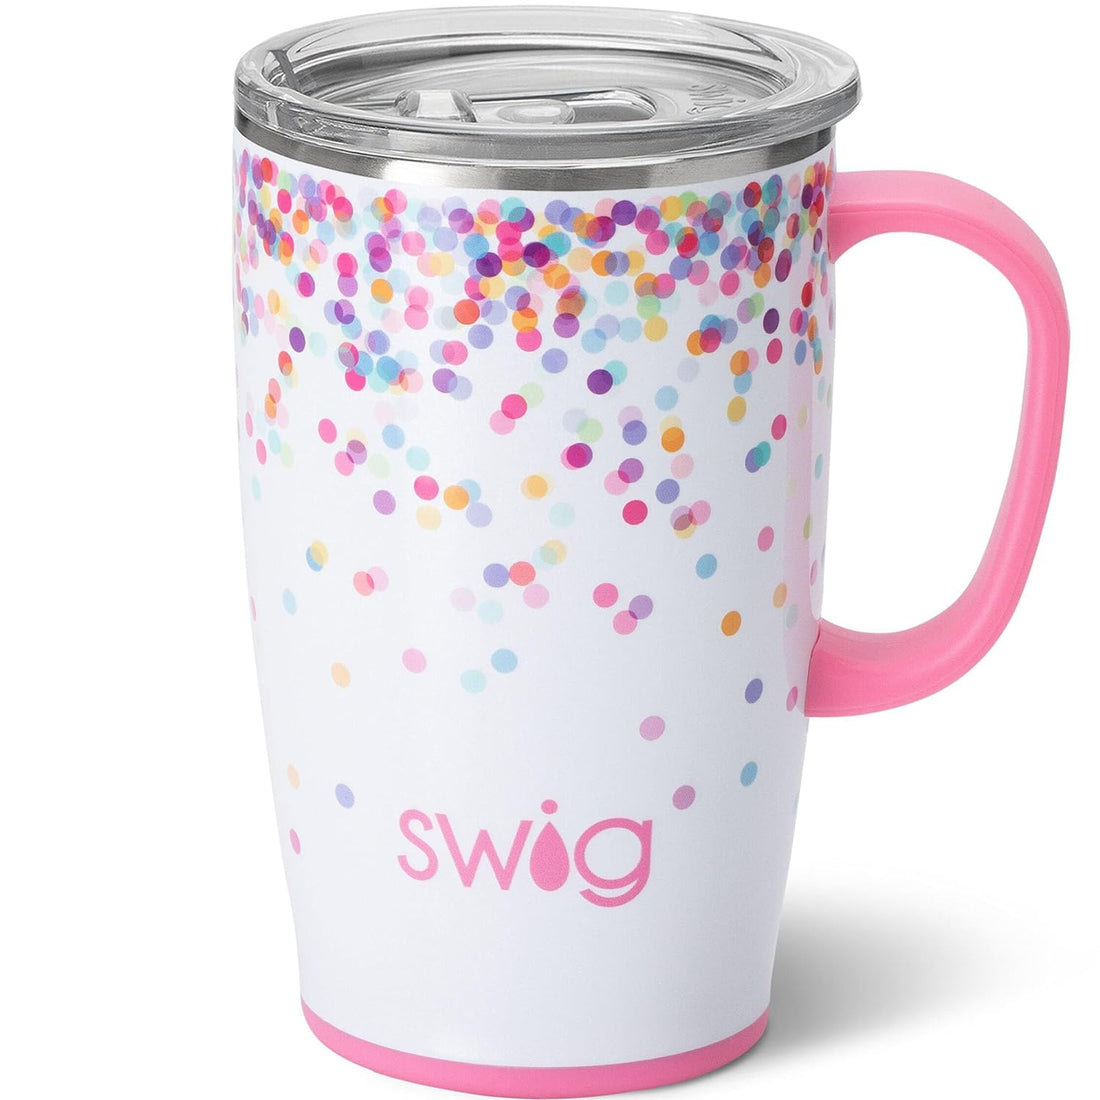 Swig Life 18oz Travel Mug with Handle and Lid, Cup Holder Friendly, Dishwasher Safe, Stainless Steel, Triple Insulated Coffee Mug Tumbler (Confetti)